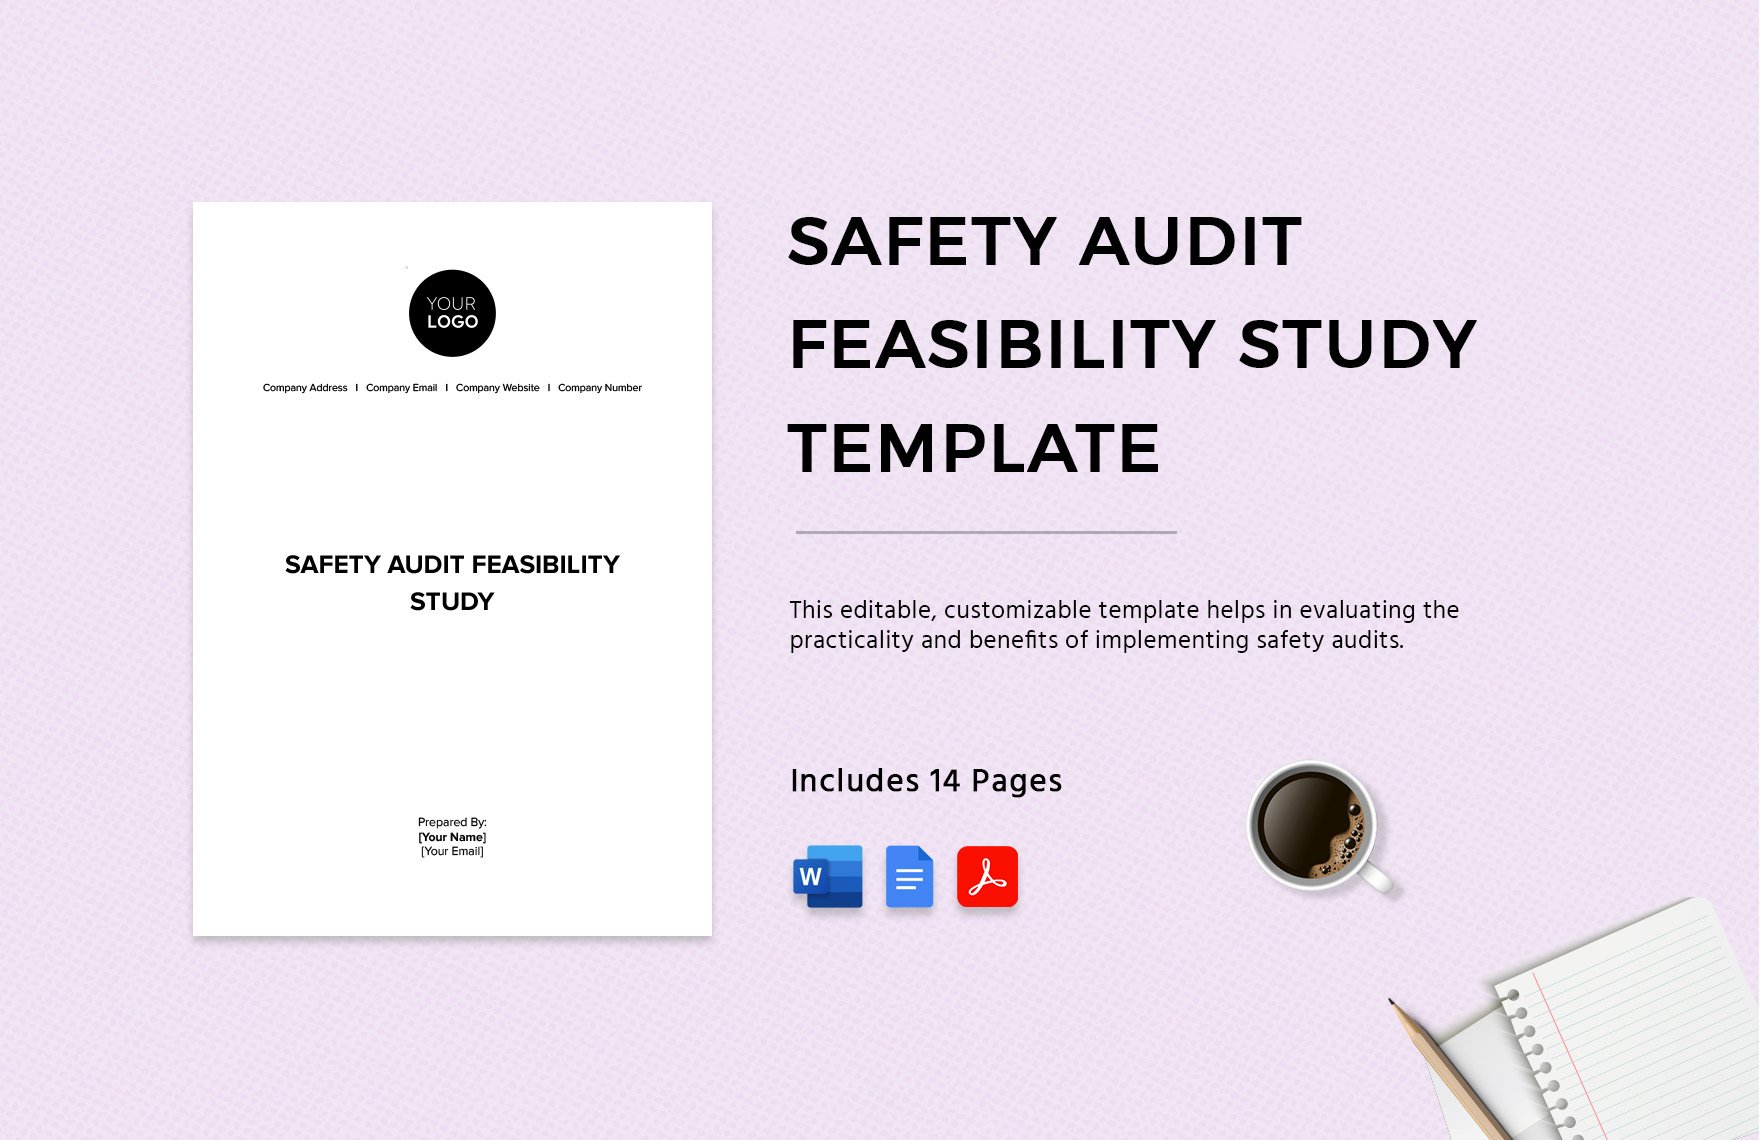 Safety Audit Feasibility Study Template